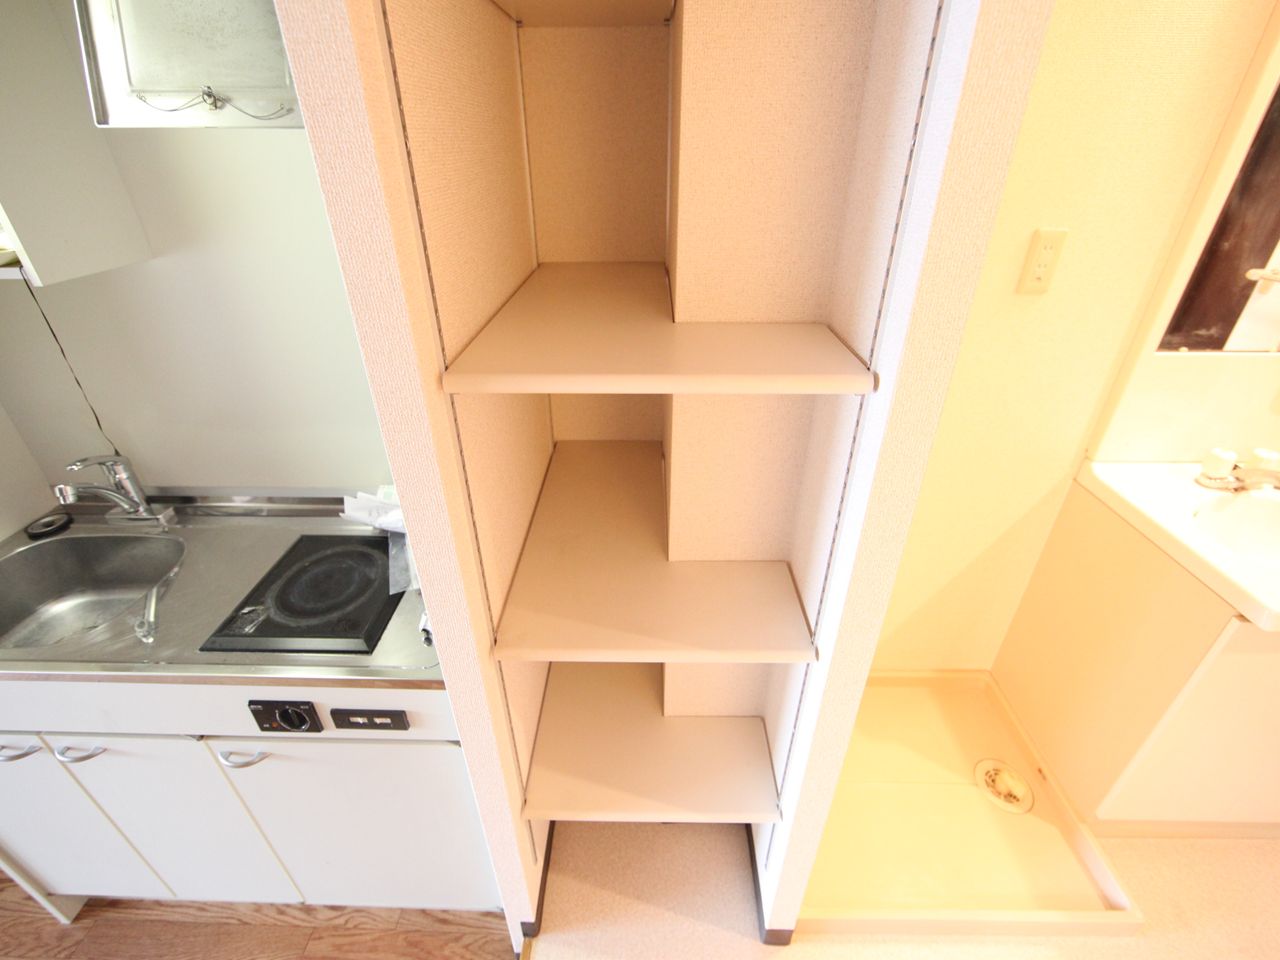 Other. It comes with storage shelves in the kitchen